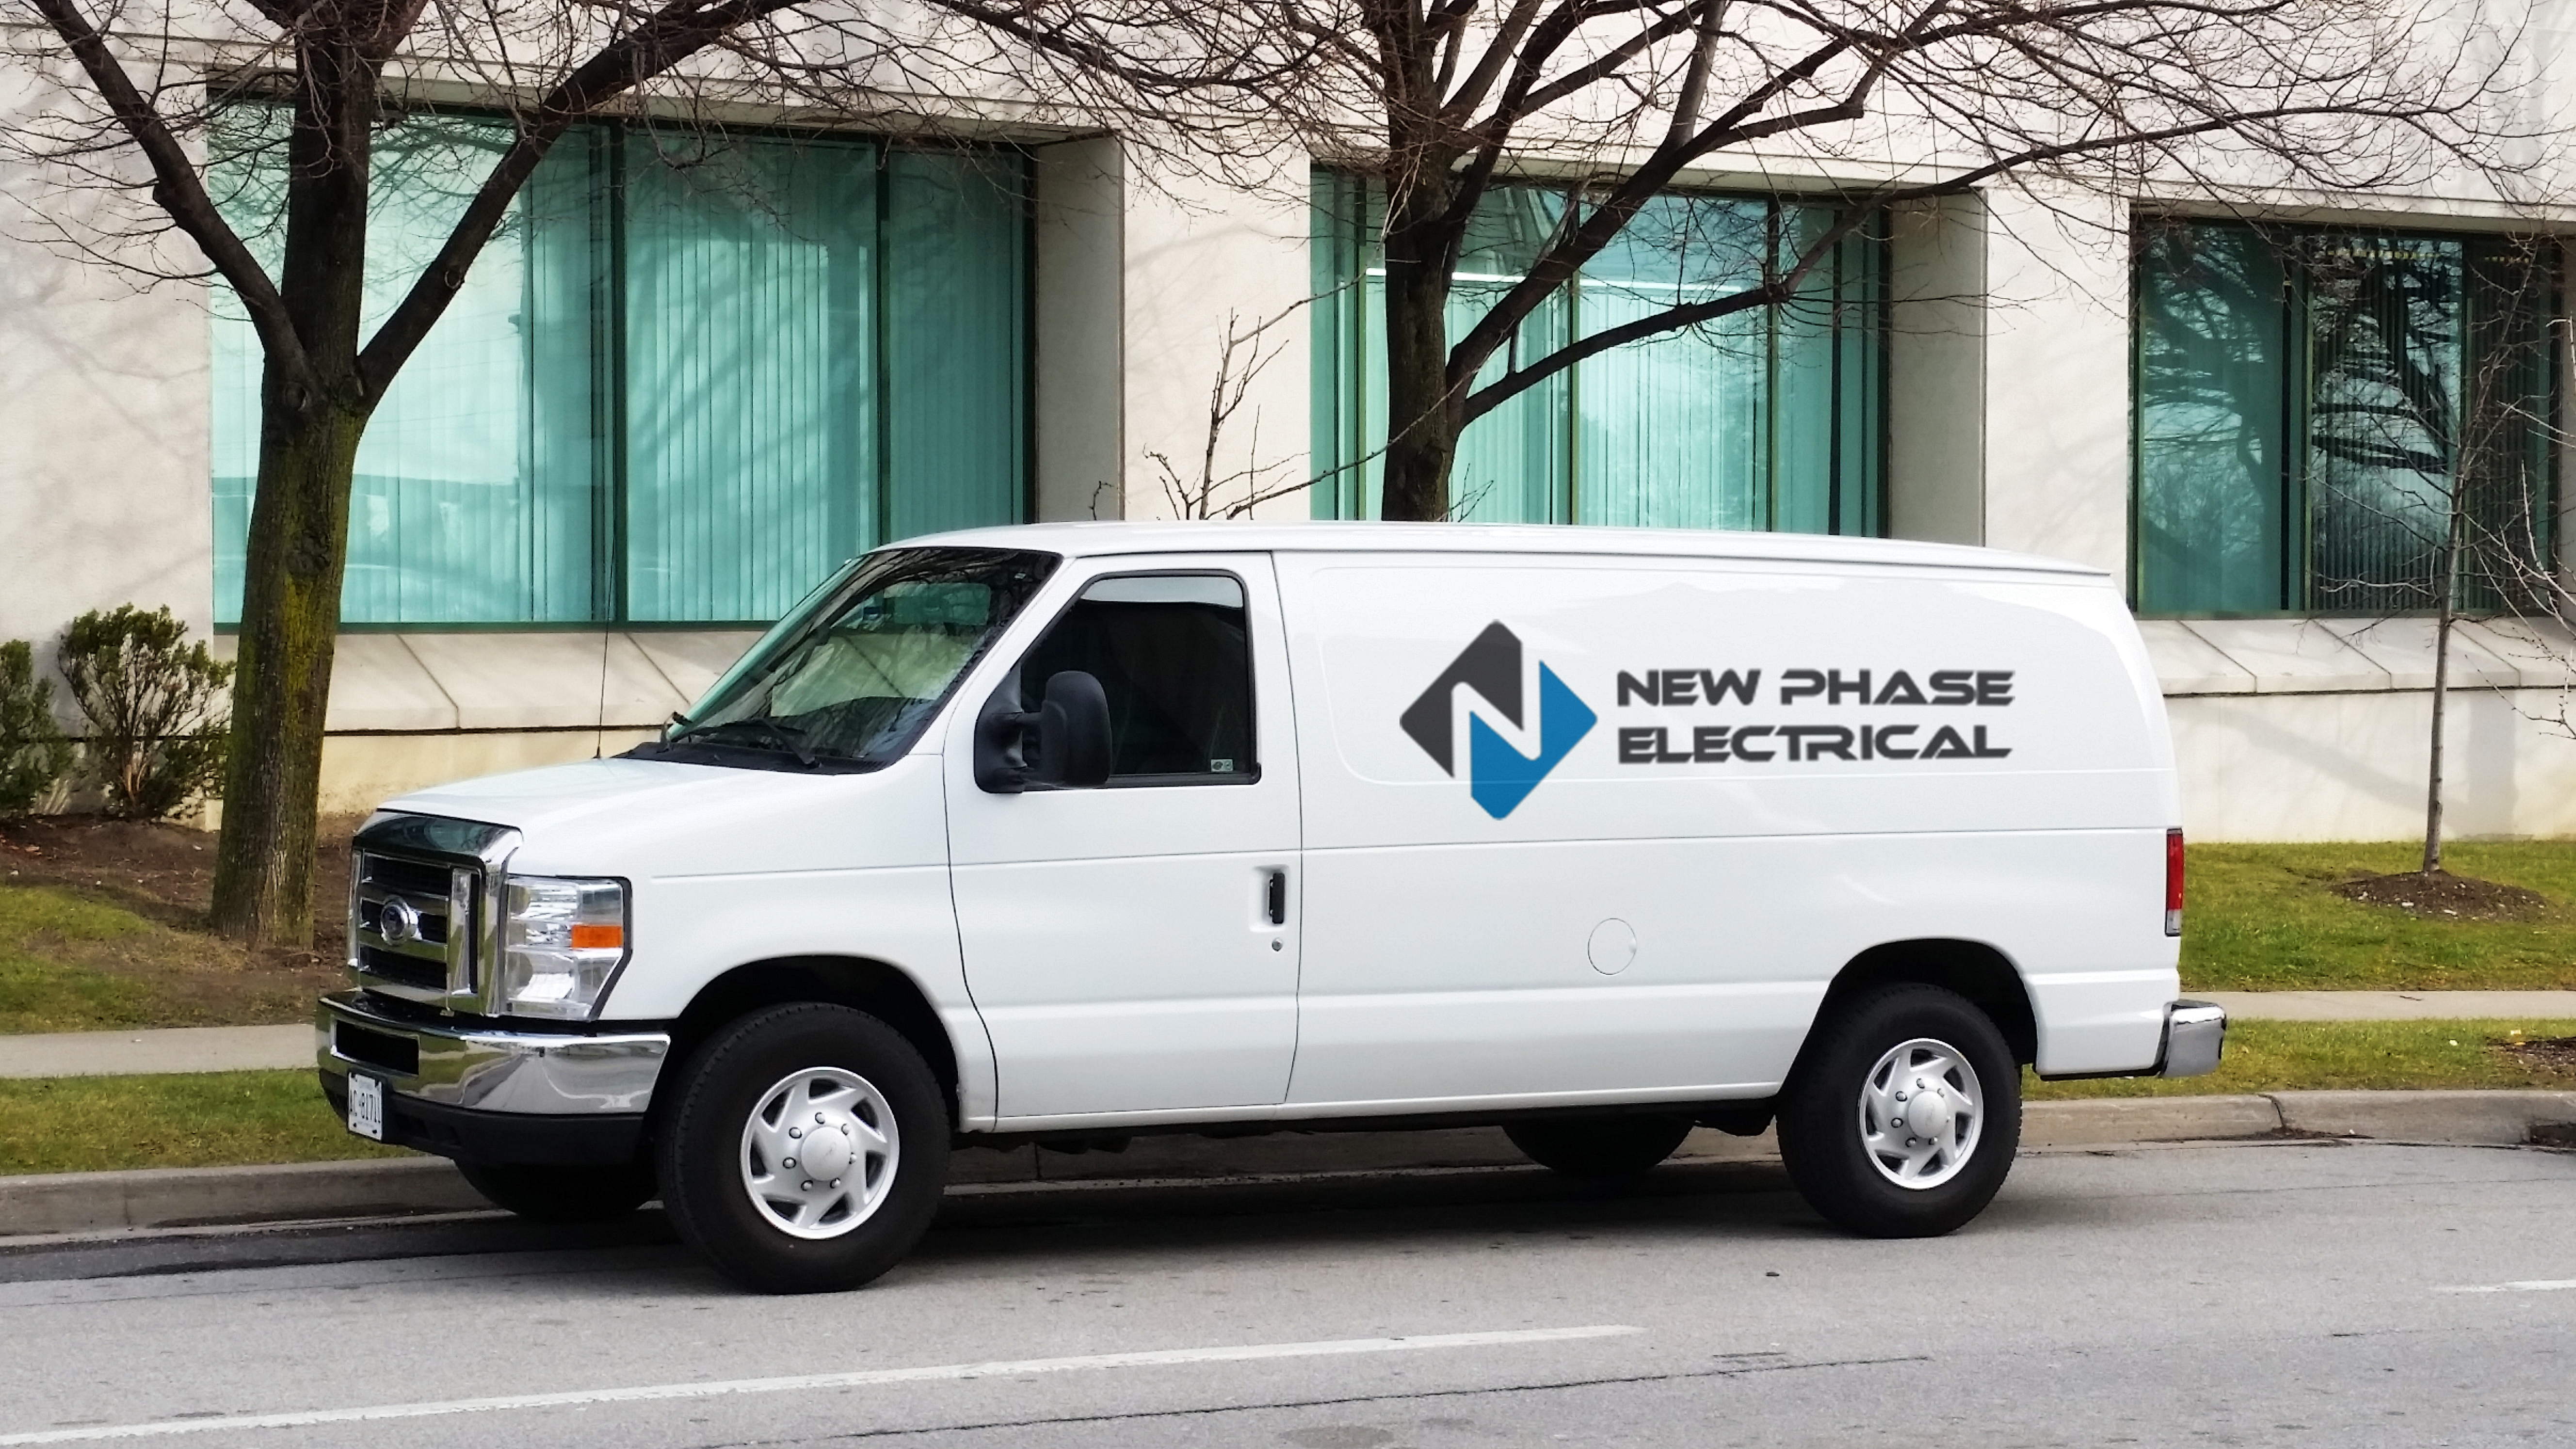 New phase electrical service has professional tools